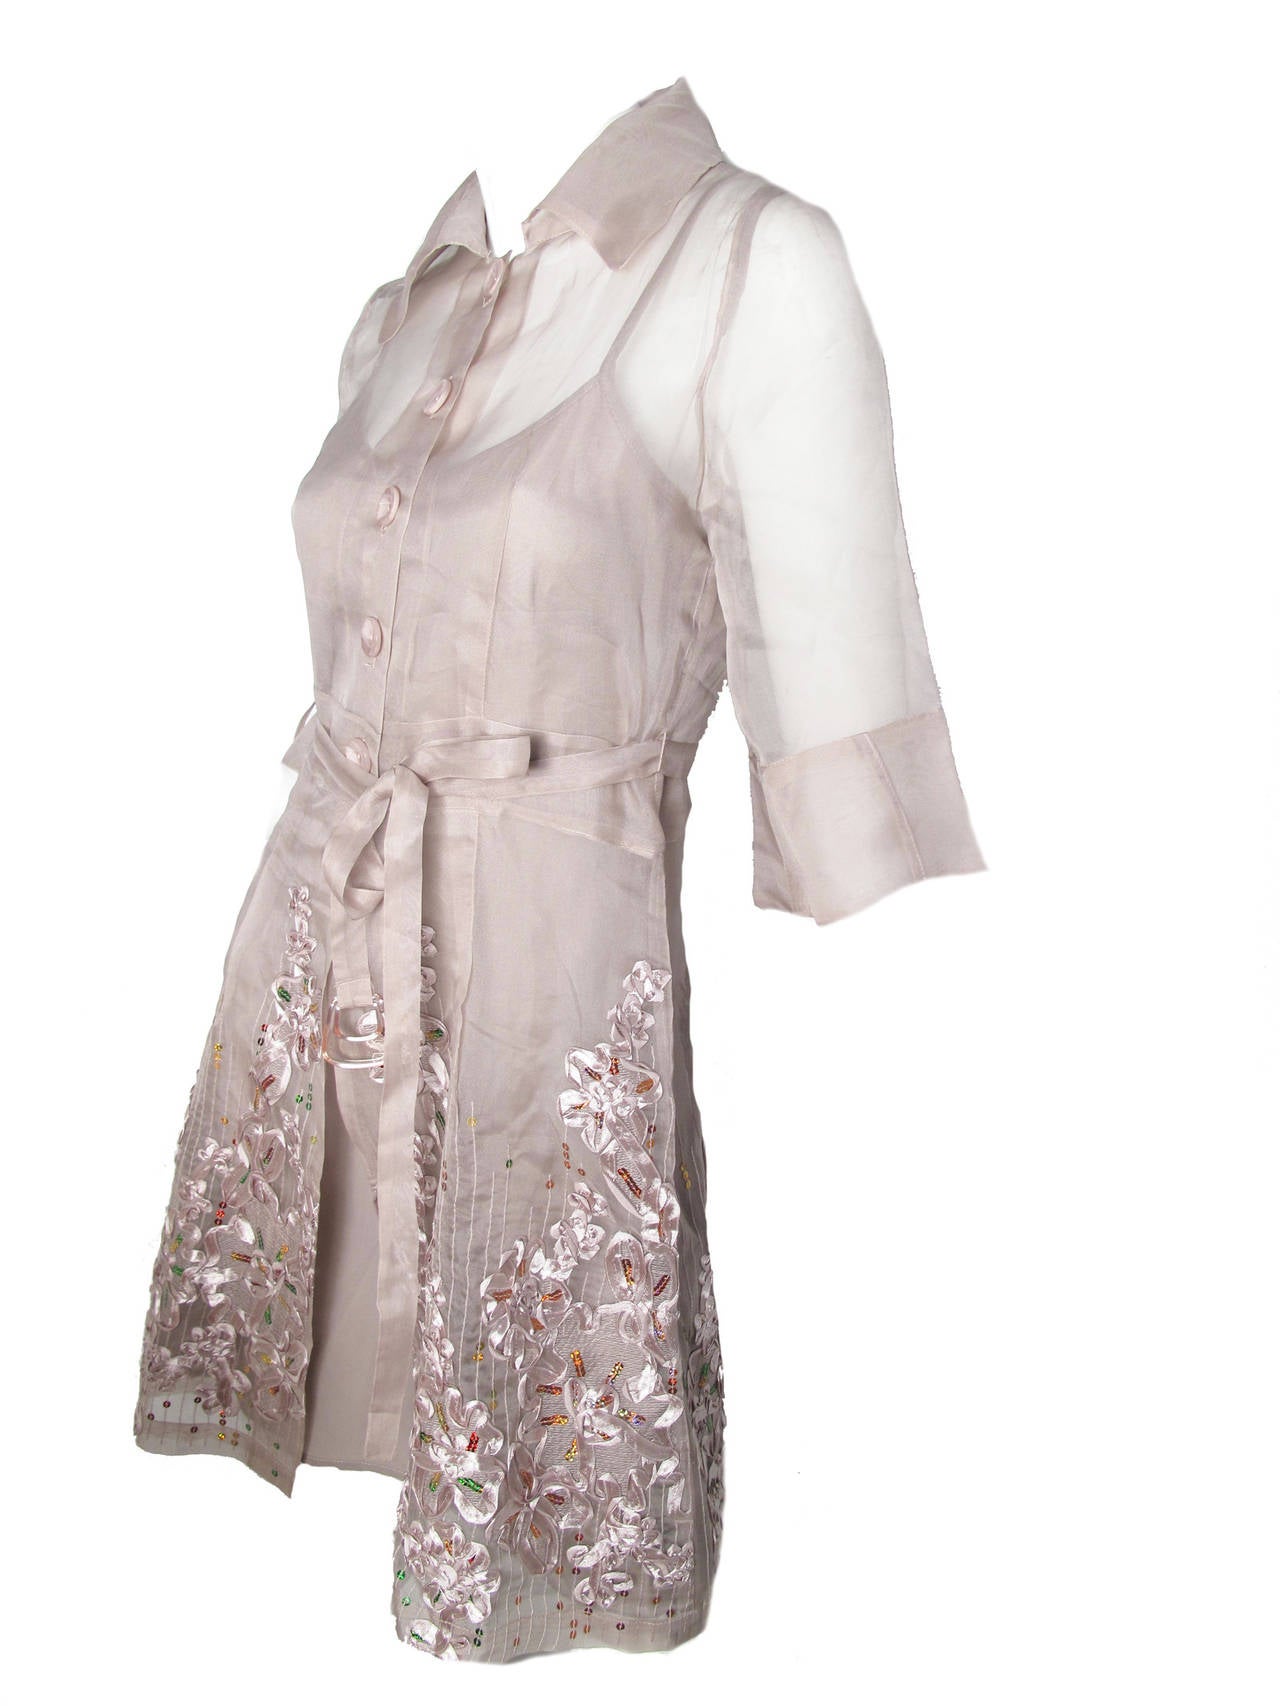 Kenzo mauve sheer silk organza dress with slip and belt.  Buttons down front.  Floral design on bottom with sequins.

Slip: 34